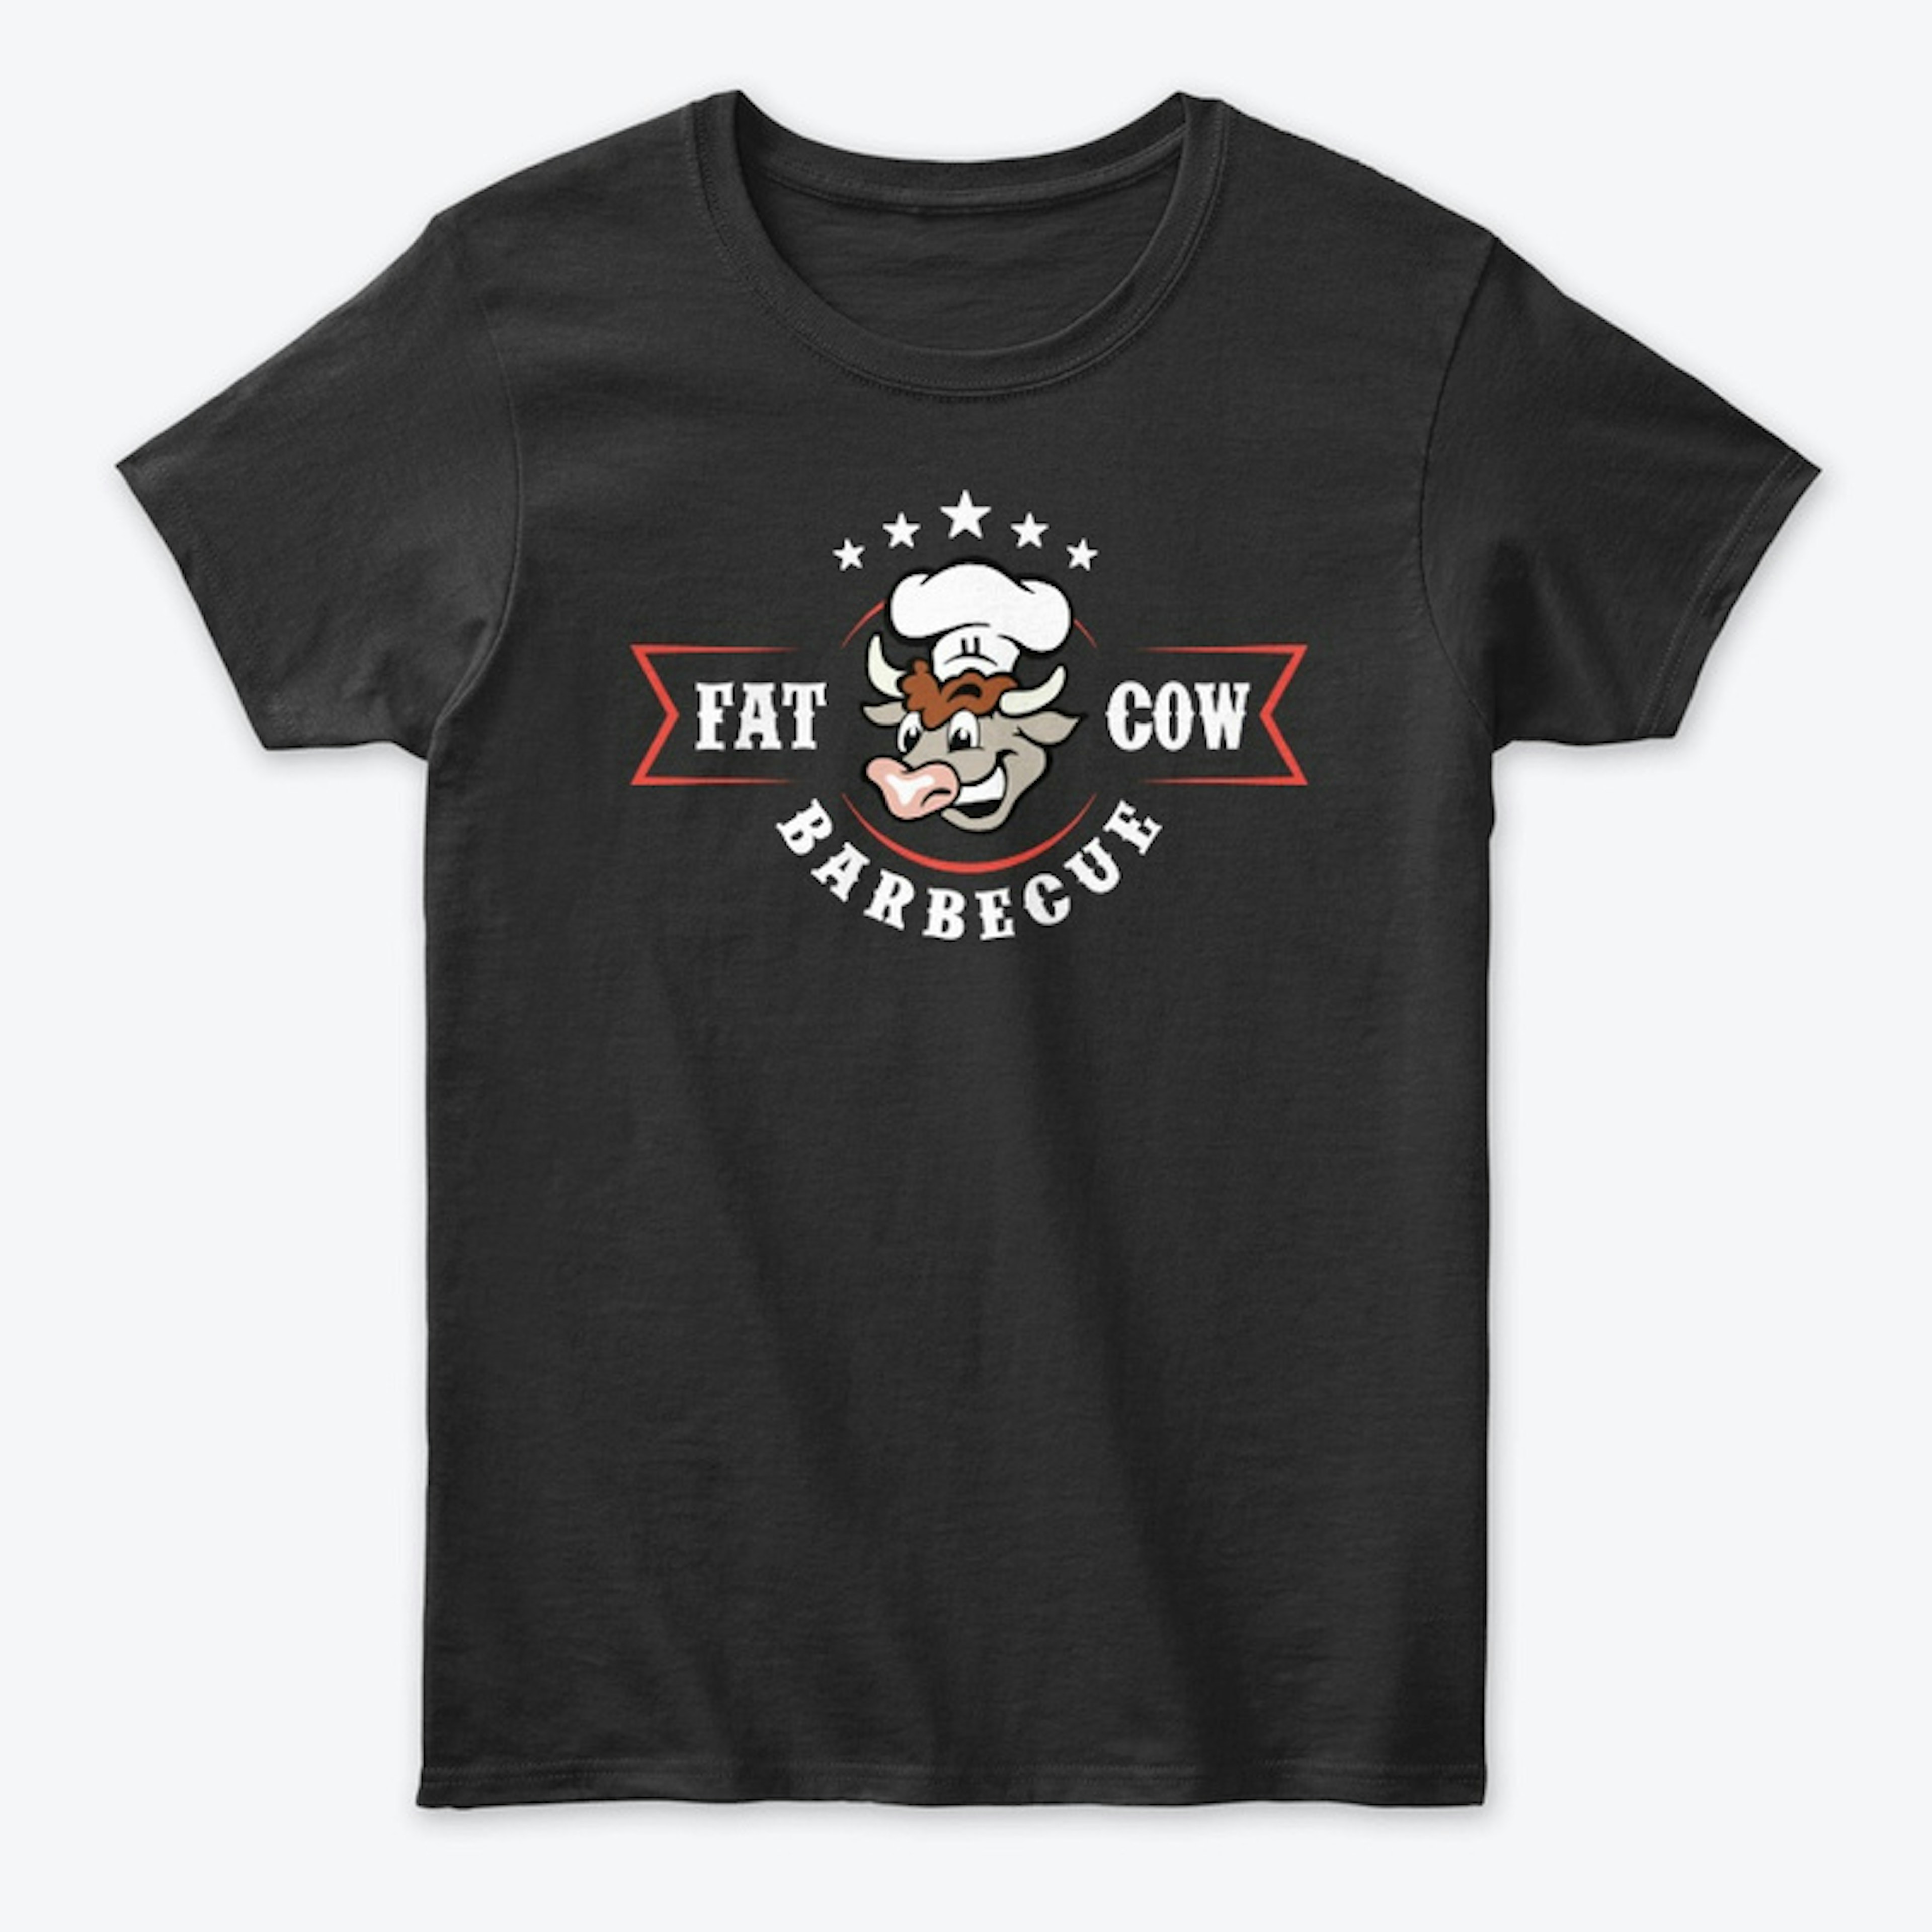 Fat Cow Barbecue Women's Classic Tee